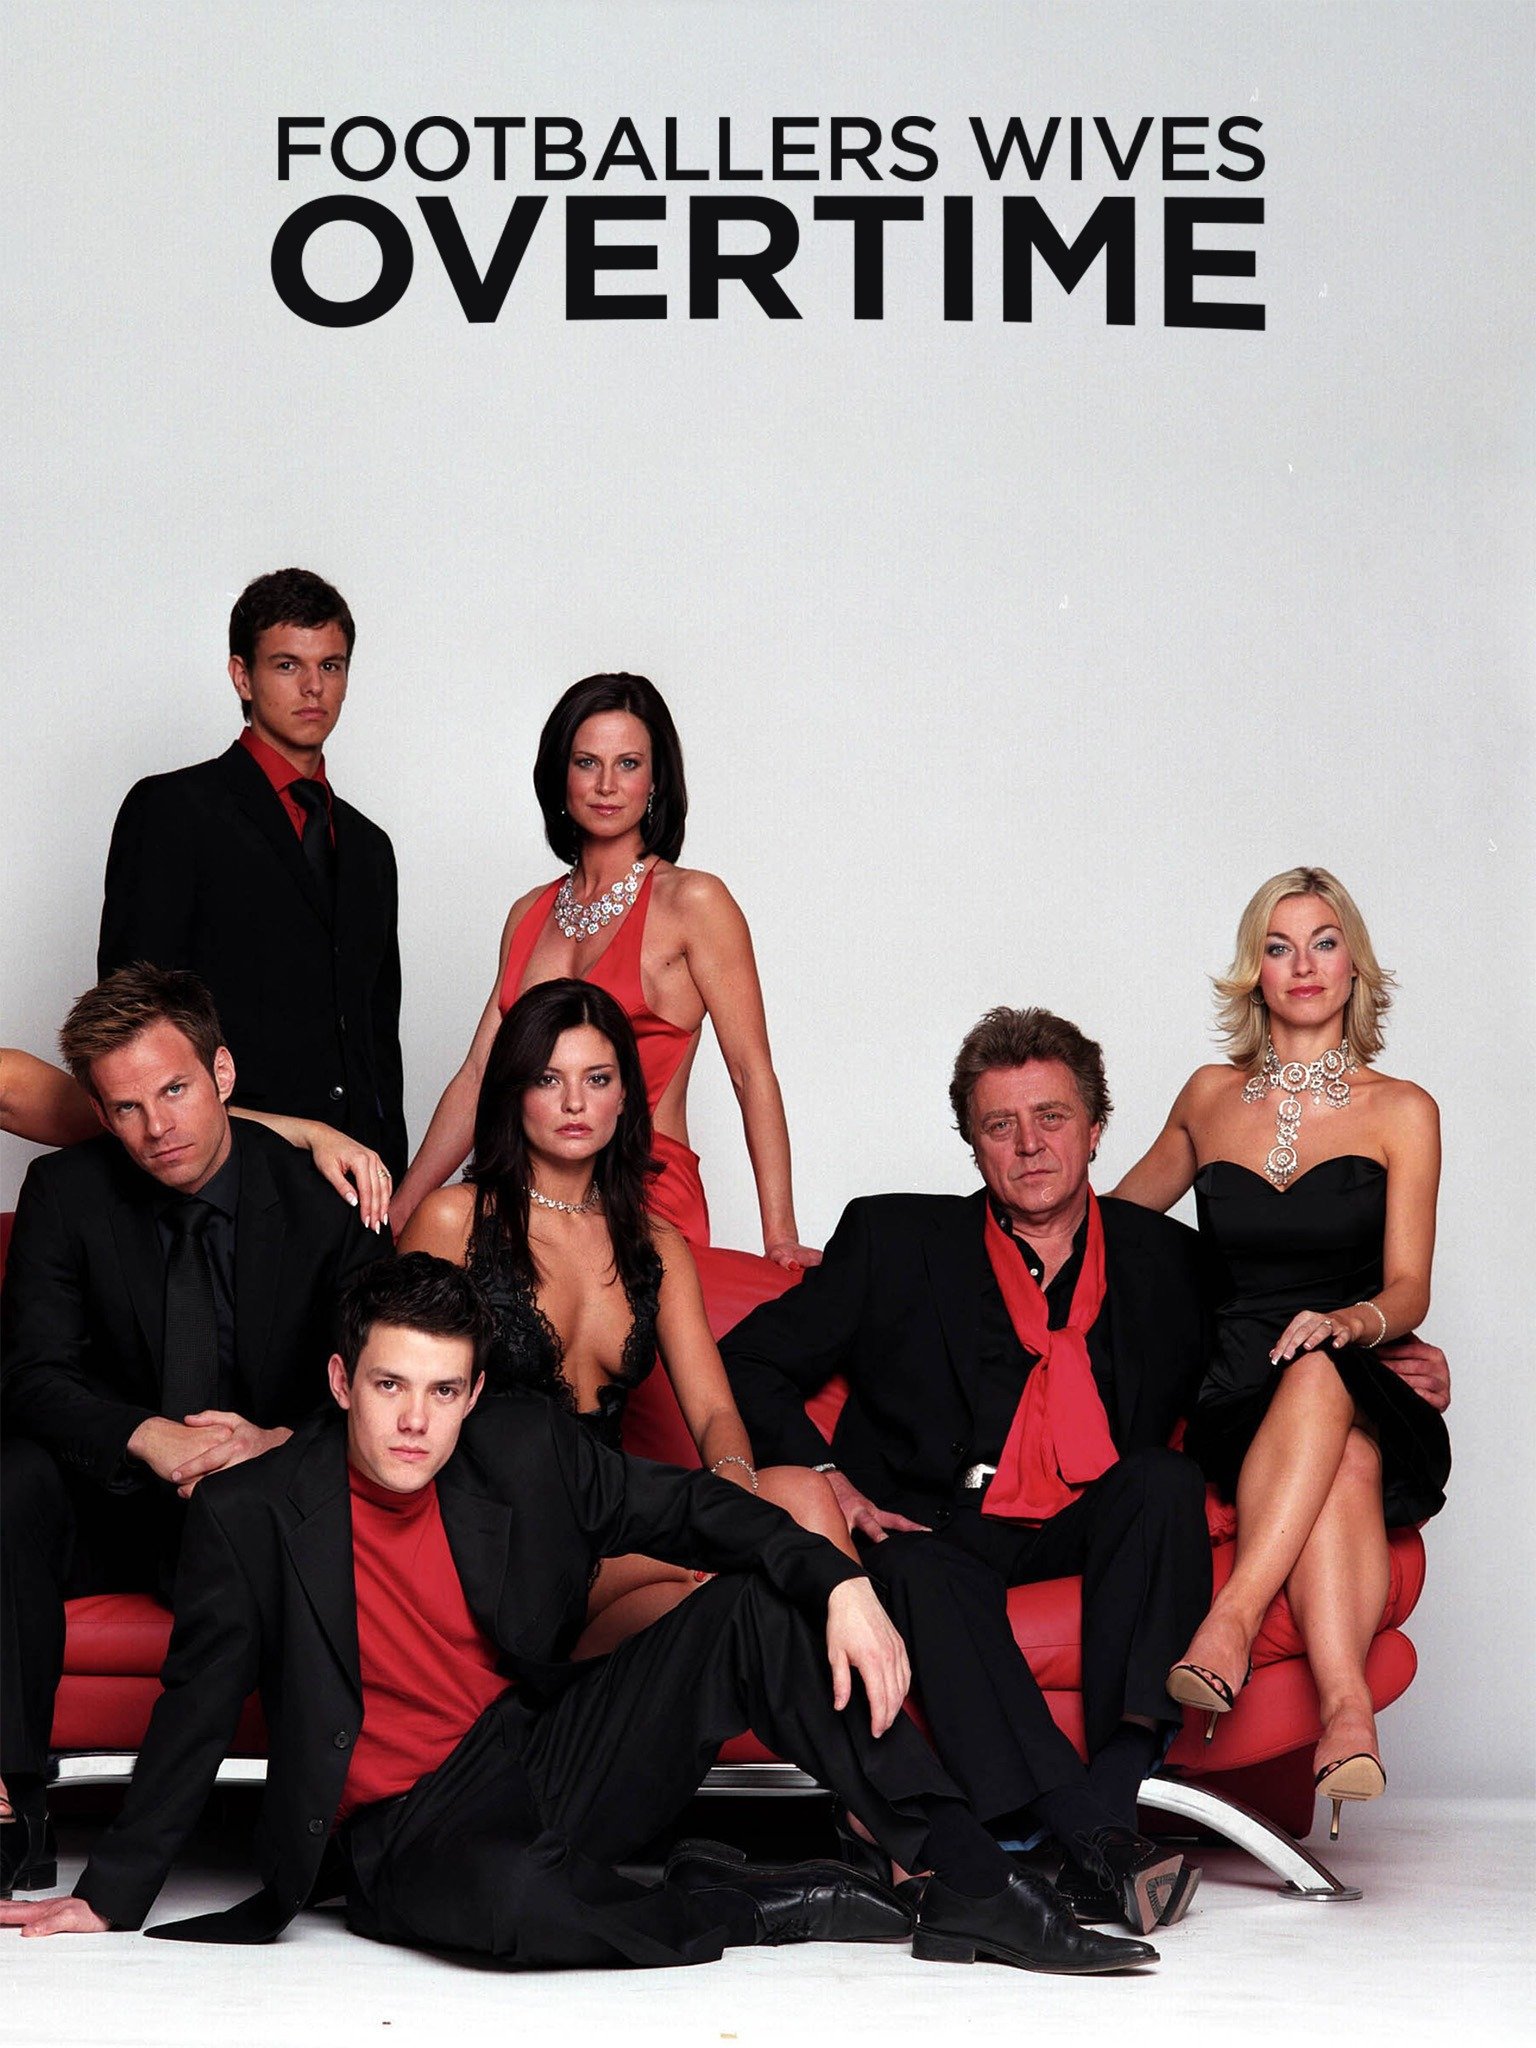 Footballers Wives Overtime image